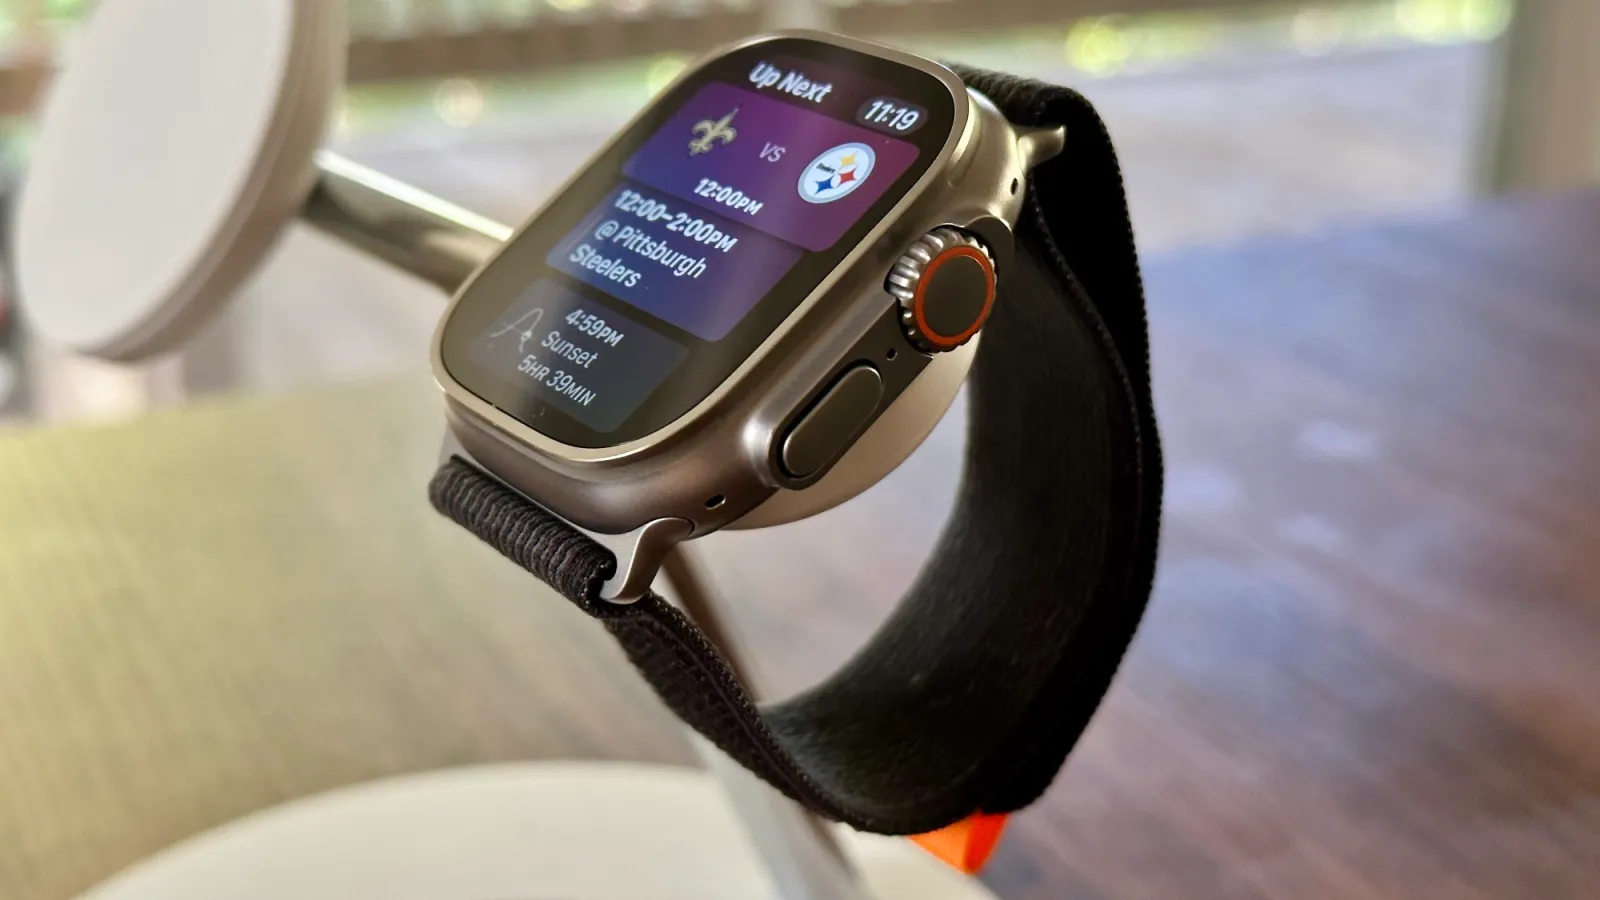 Apple Watch Series 9 And Ultra 2 Features Improved  Heart Rate Check The Price Specifications And  Availability In Detail Marathi News Apple Smartawatch : Apple Watch Series 9 आणि Ultra 2 मध्ये मिळणार भन्नाट फिचर्स , जाणून घ्या सविस्तर